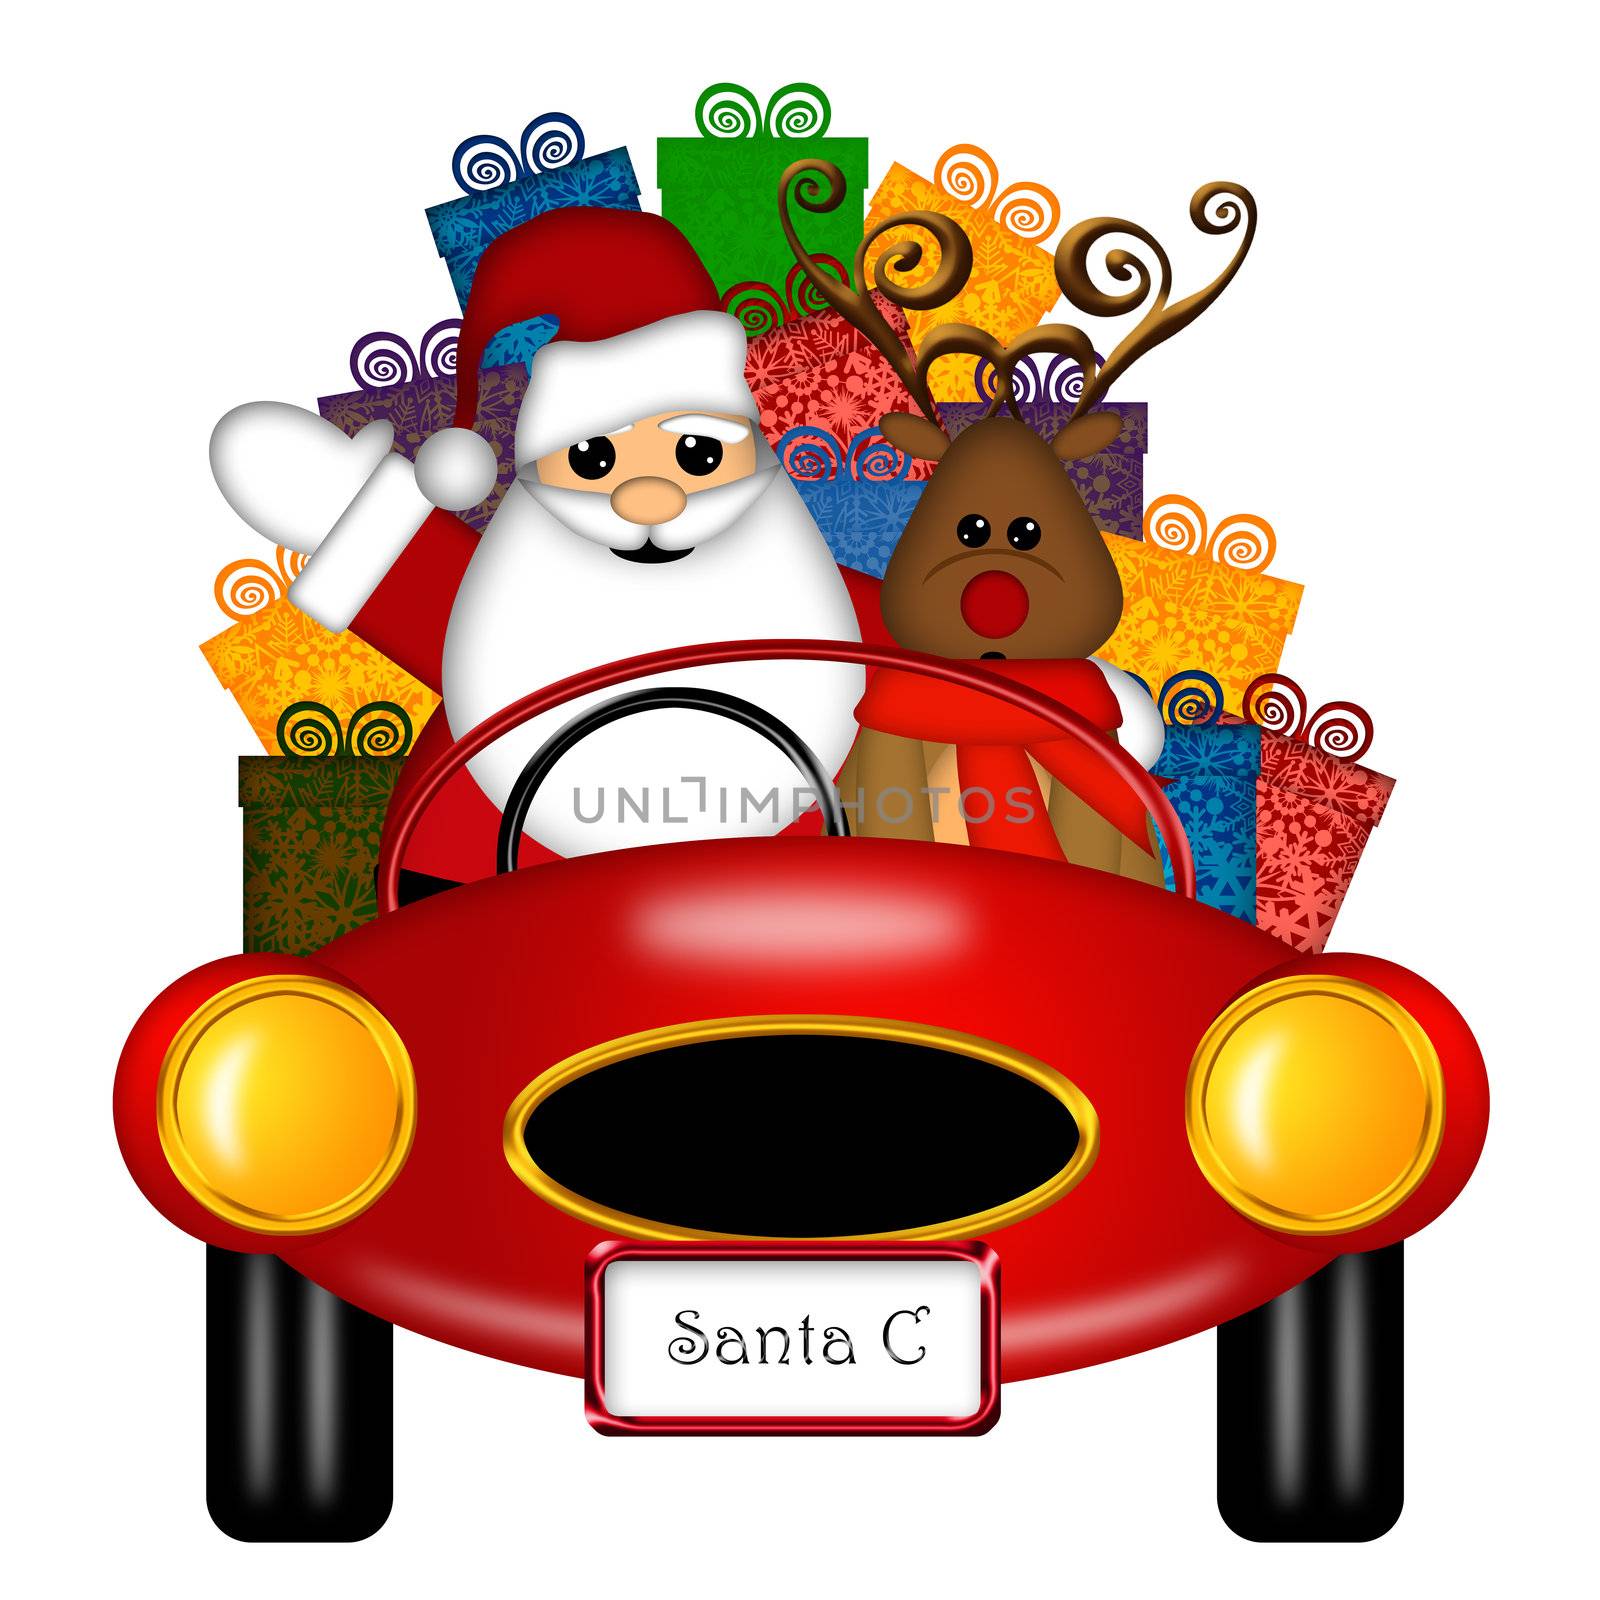 Santa and Reindeer in Red Sports Car with Presents by Davidgn